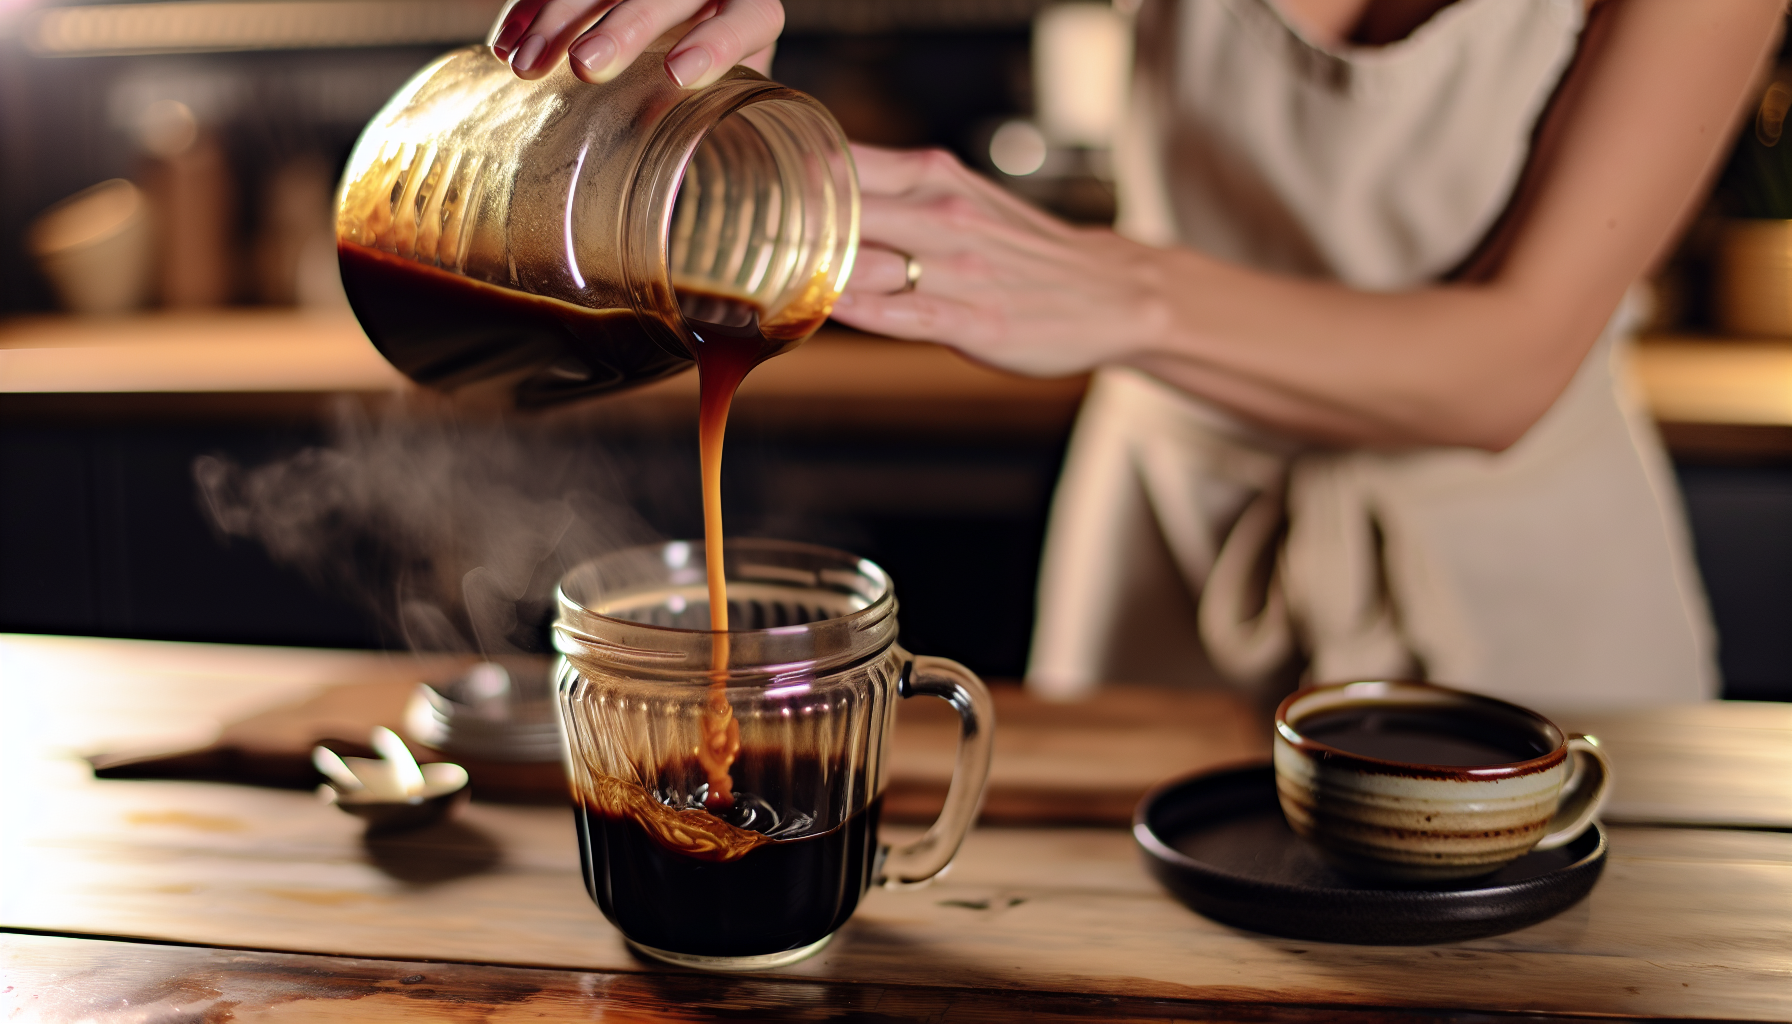 Chai syrup being poured into a cup of coffee